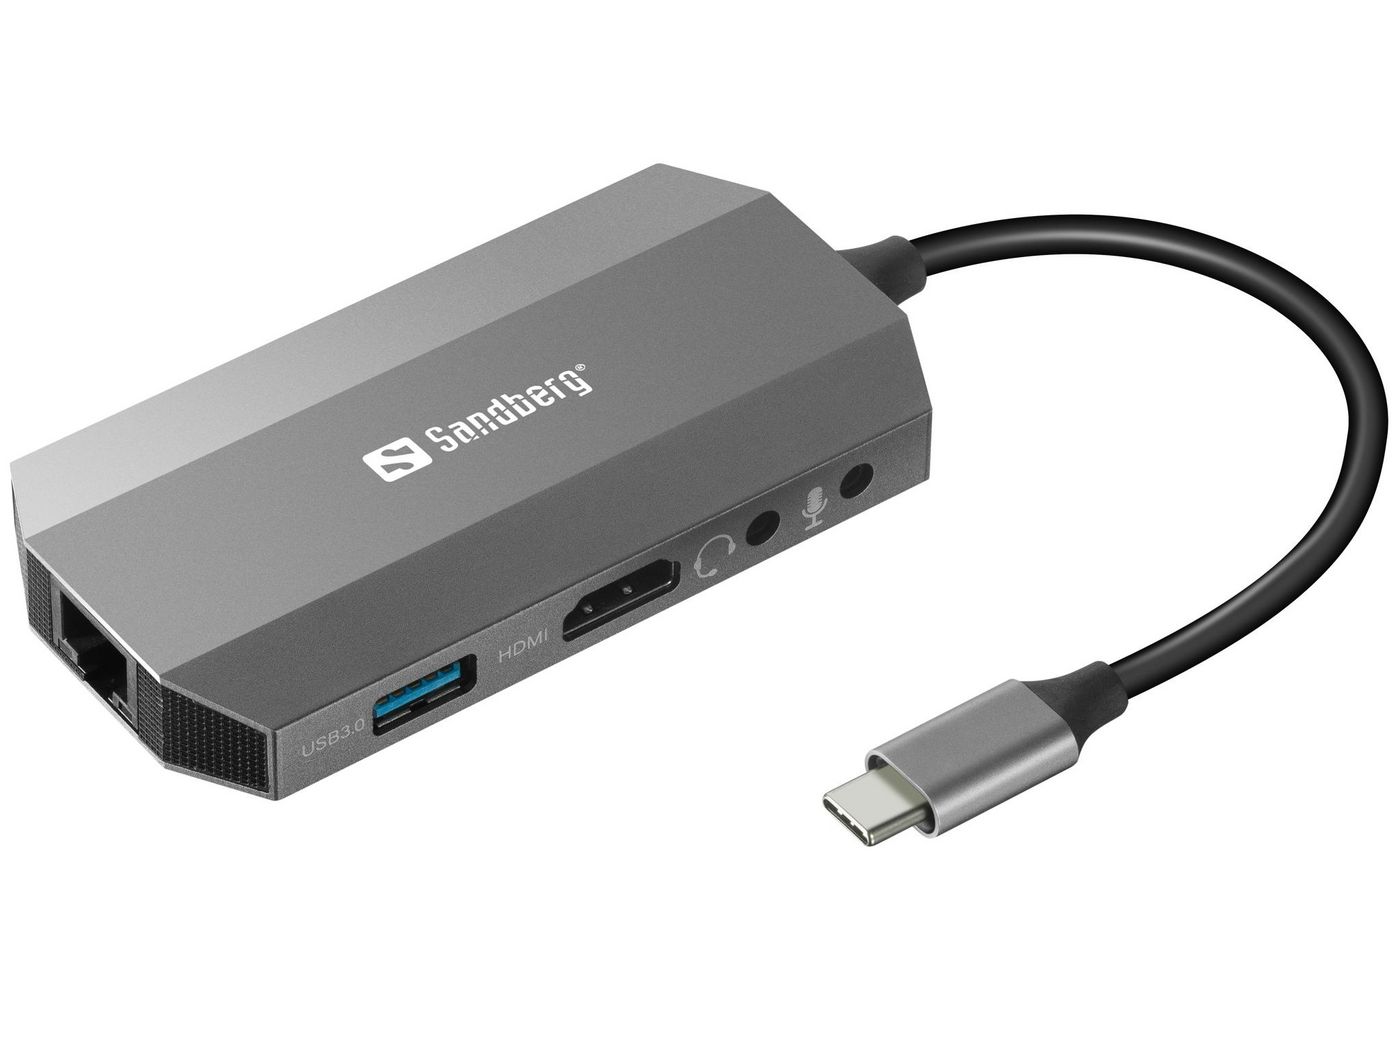 USB-C 6in1 Travel Dock - HDMI / USB-C PD / 2x USB 3.0 A / RJ45 / headphone + microphone connector / SD - 100w USB Power Delivery